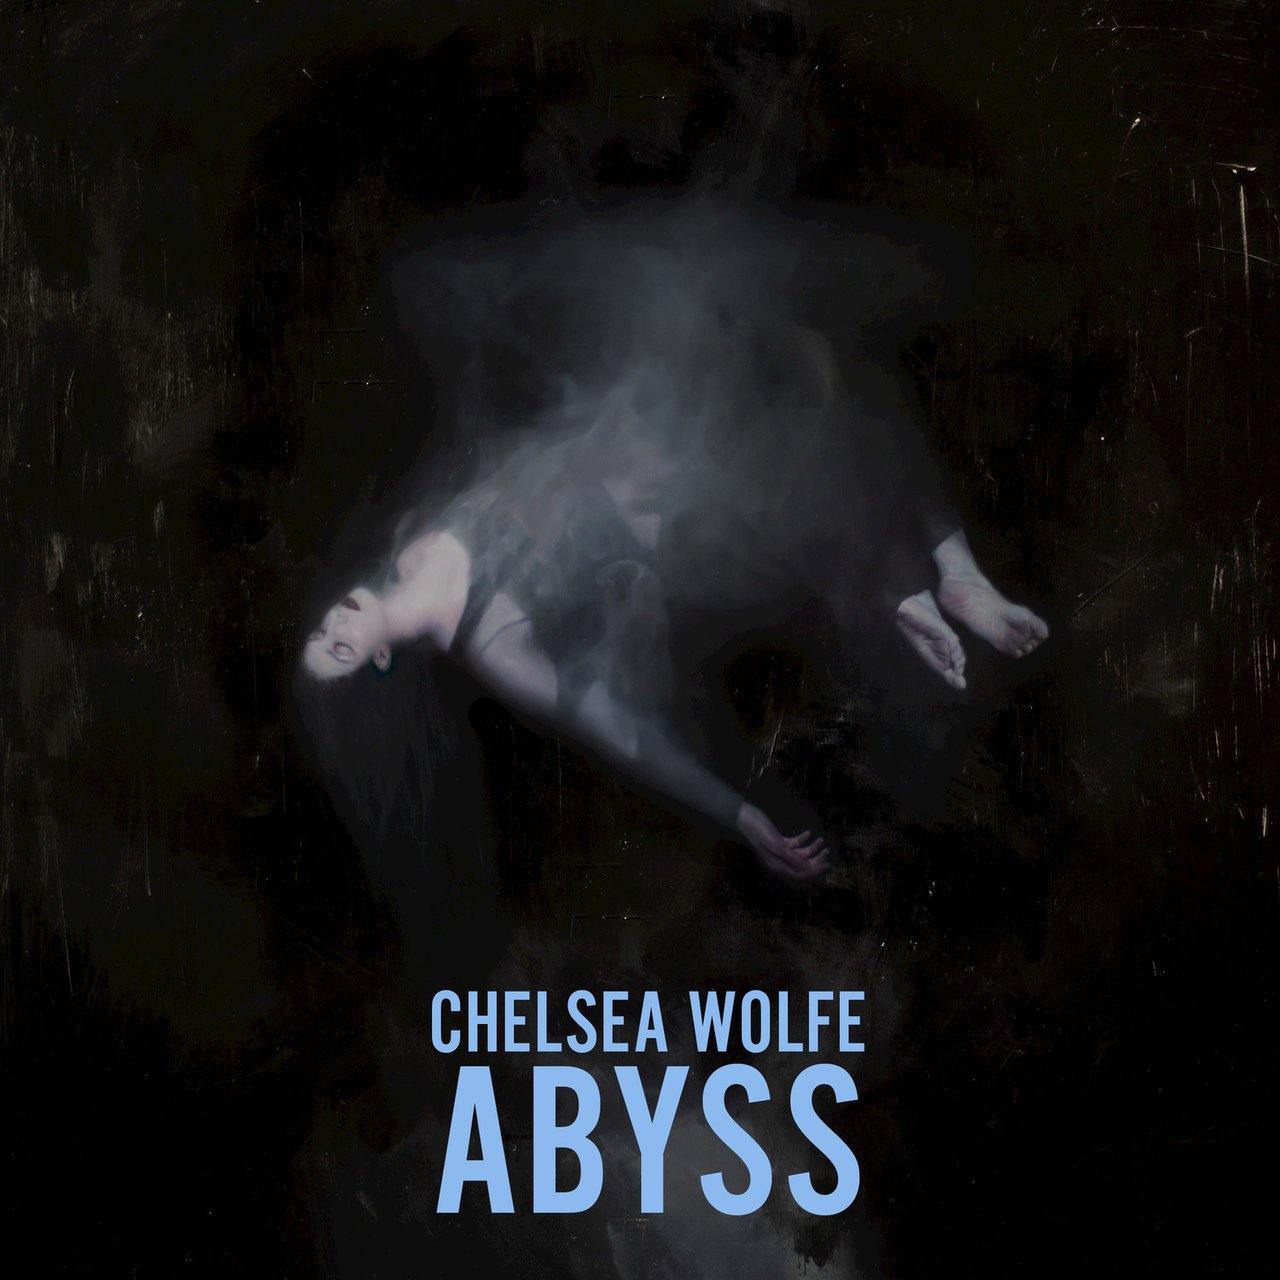 Chelsea Wolfe - Abyss (Deluxe Edition) (2016) FLAC Download